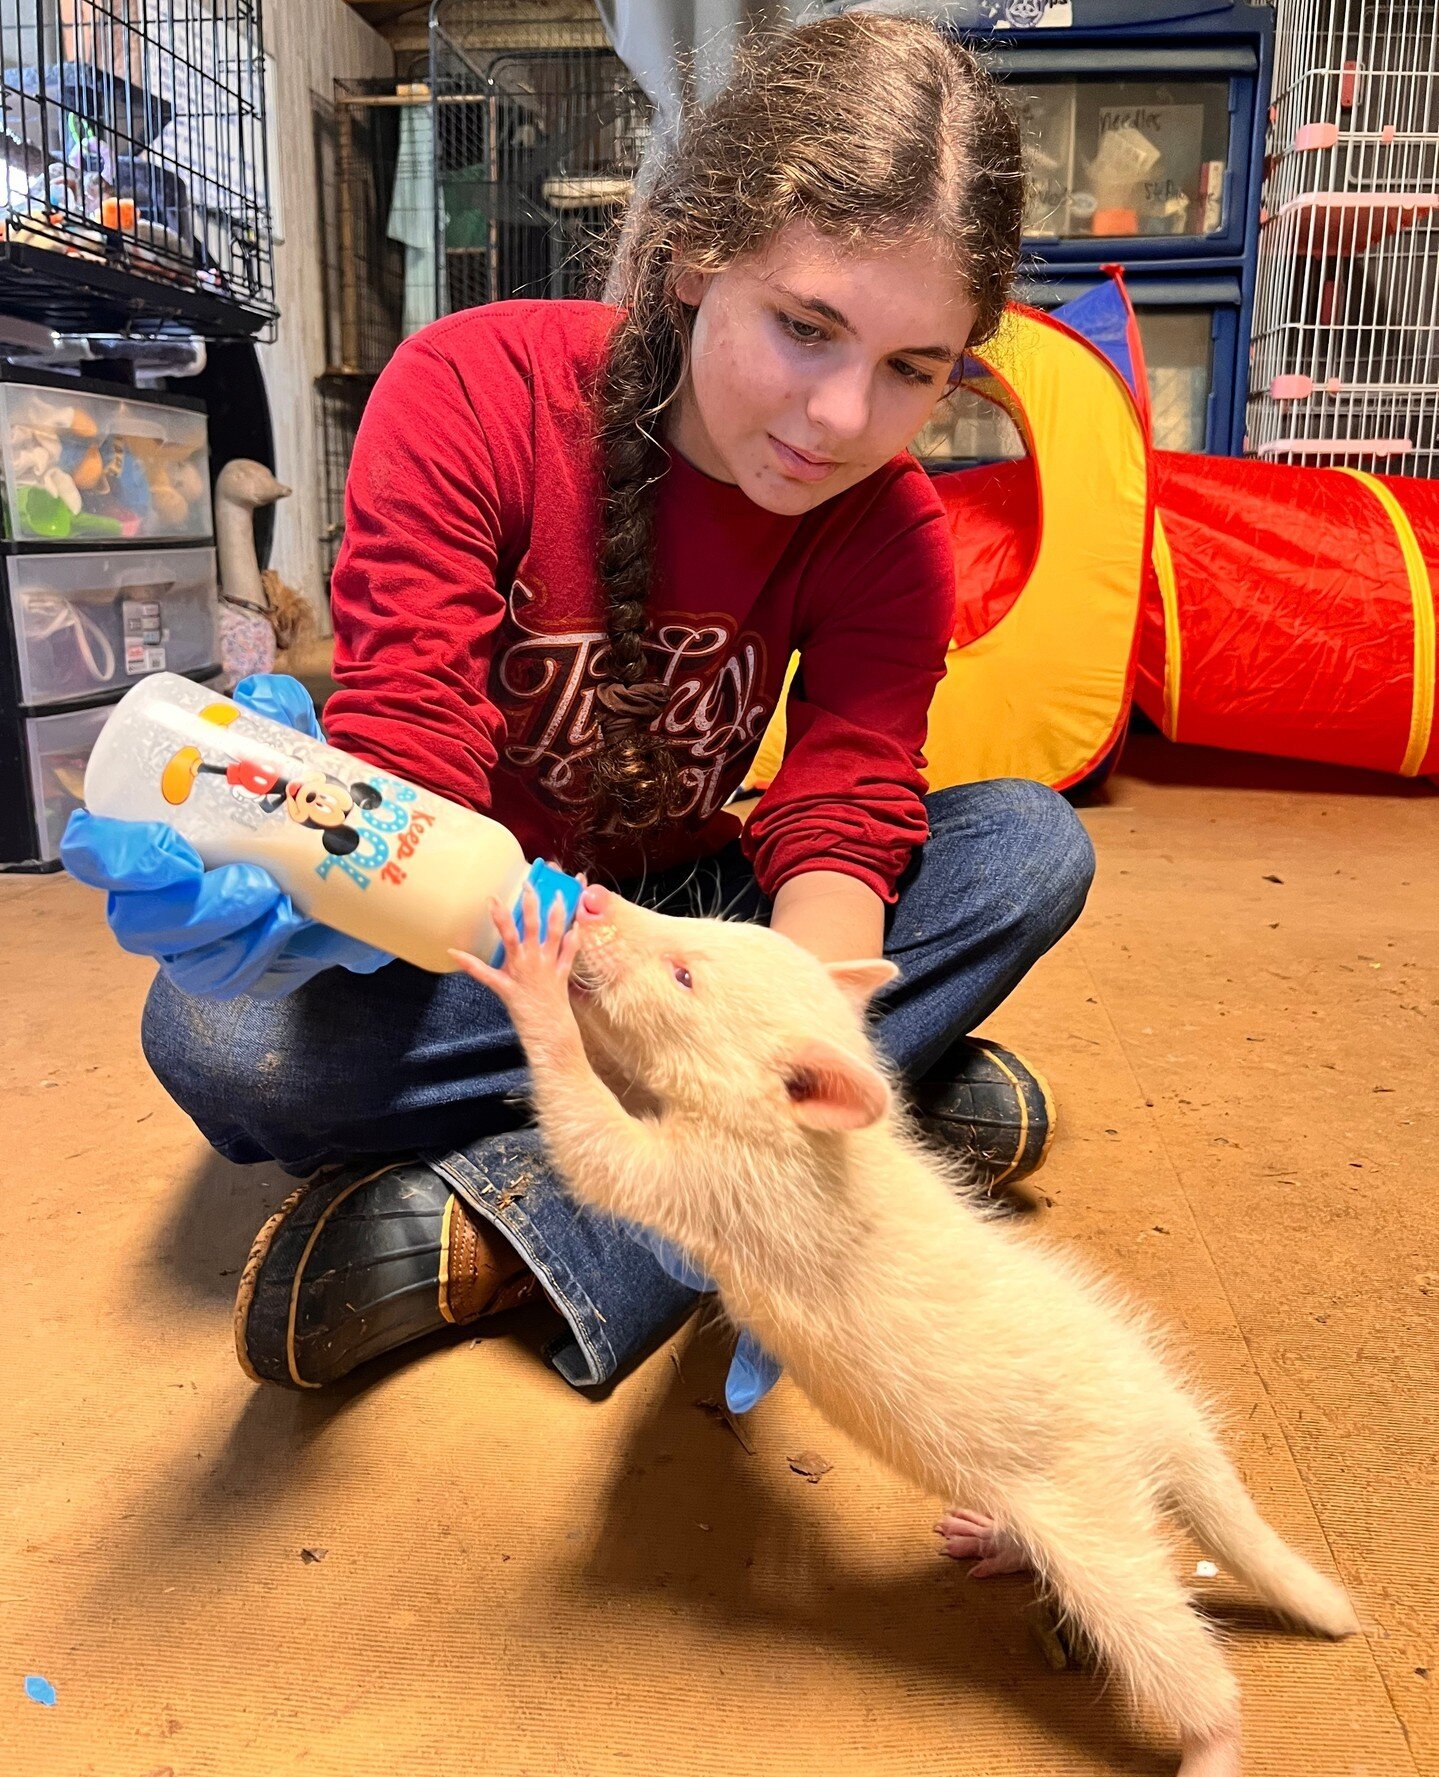 Last week, we were honored with our first ever intern, Sara from Lausanne Collegiate School. She spent her week with us cleaning critter condos, scrubbing messes, organizing linens, providing enrichment, meal prepping, feeding animals, filing paper w